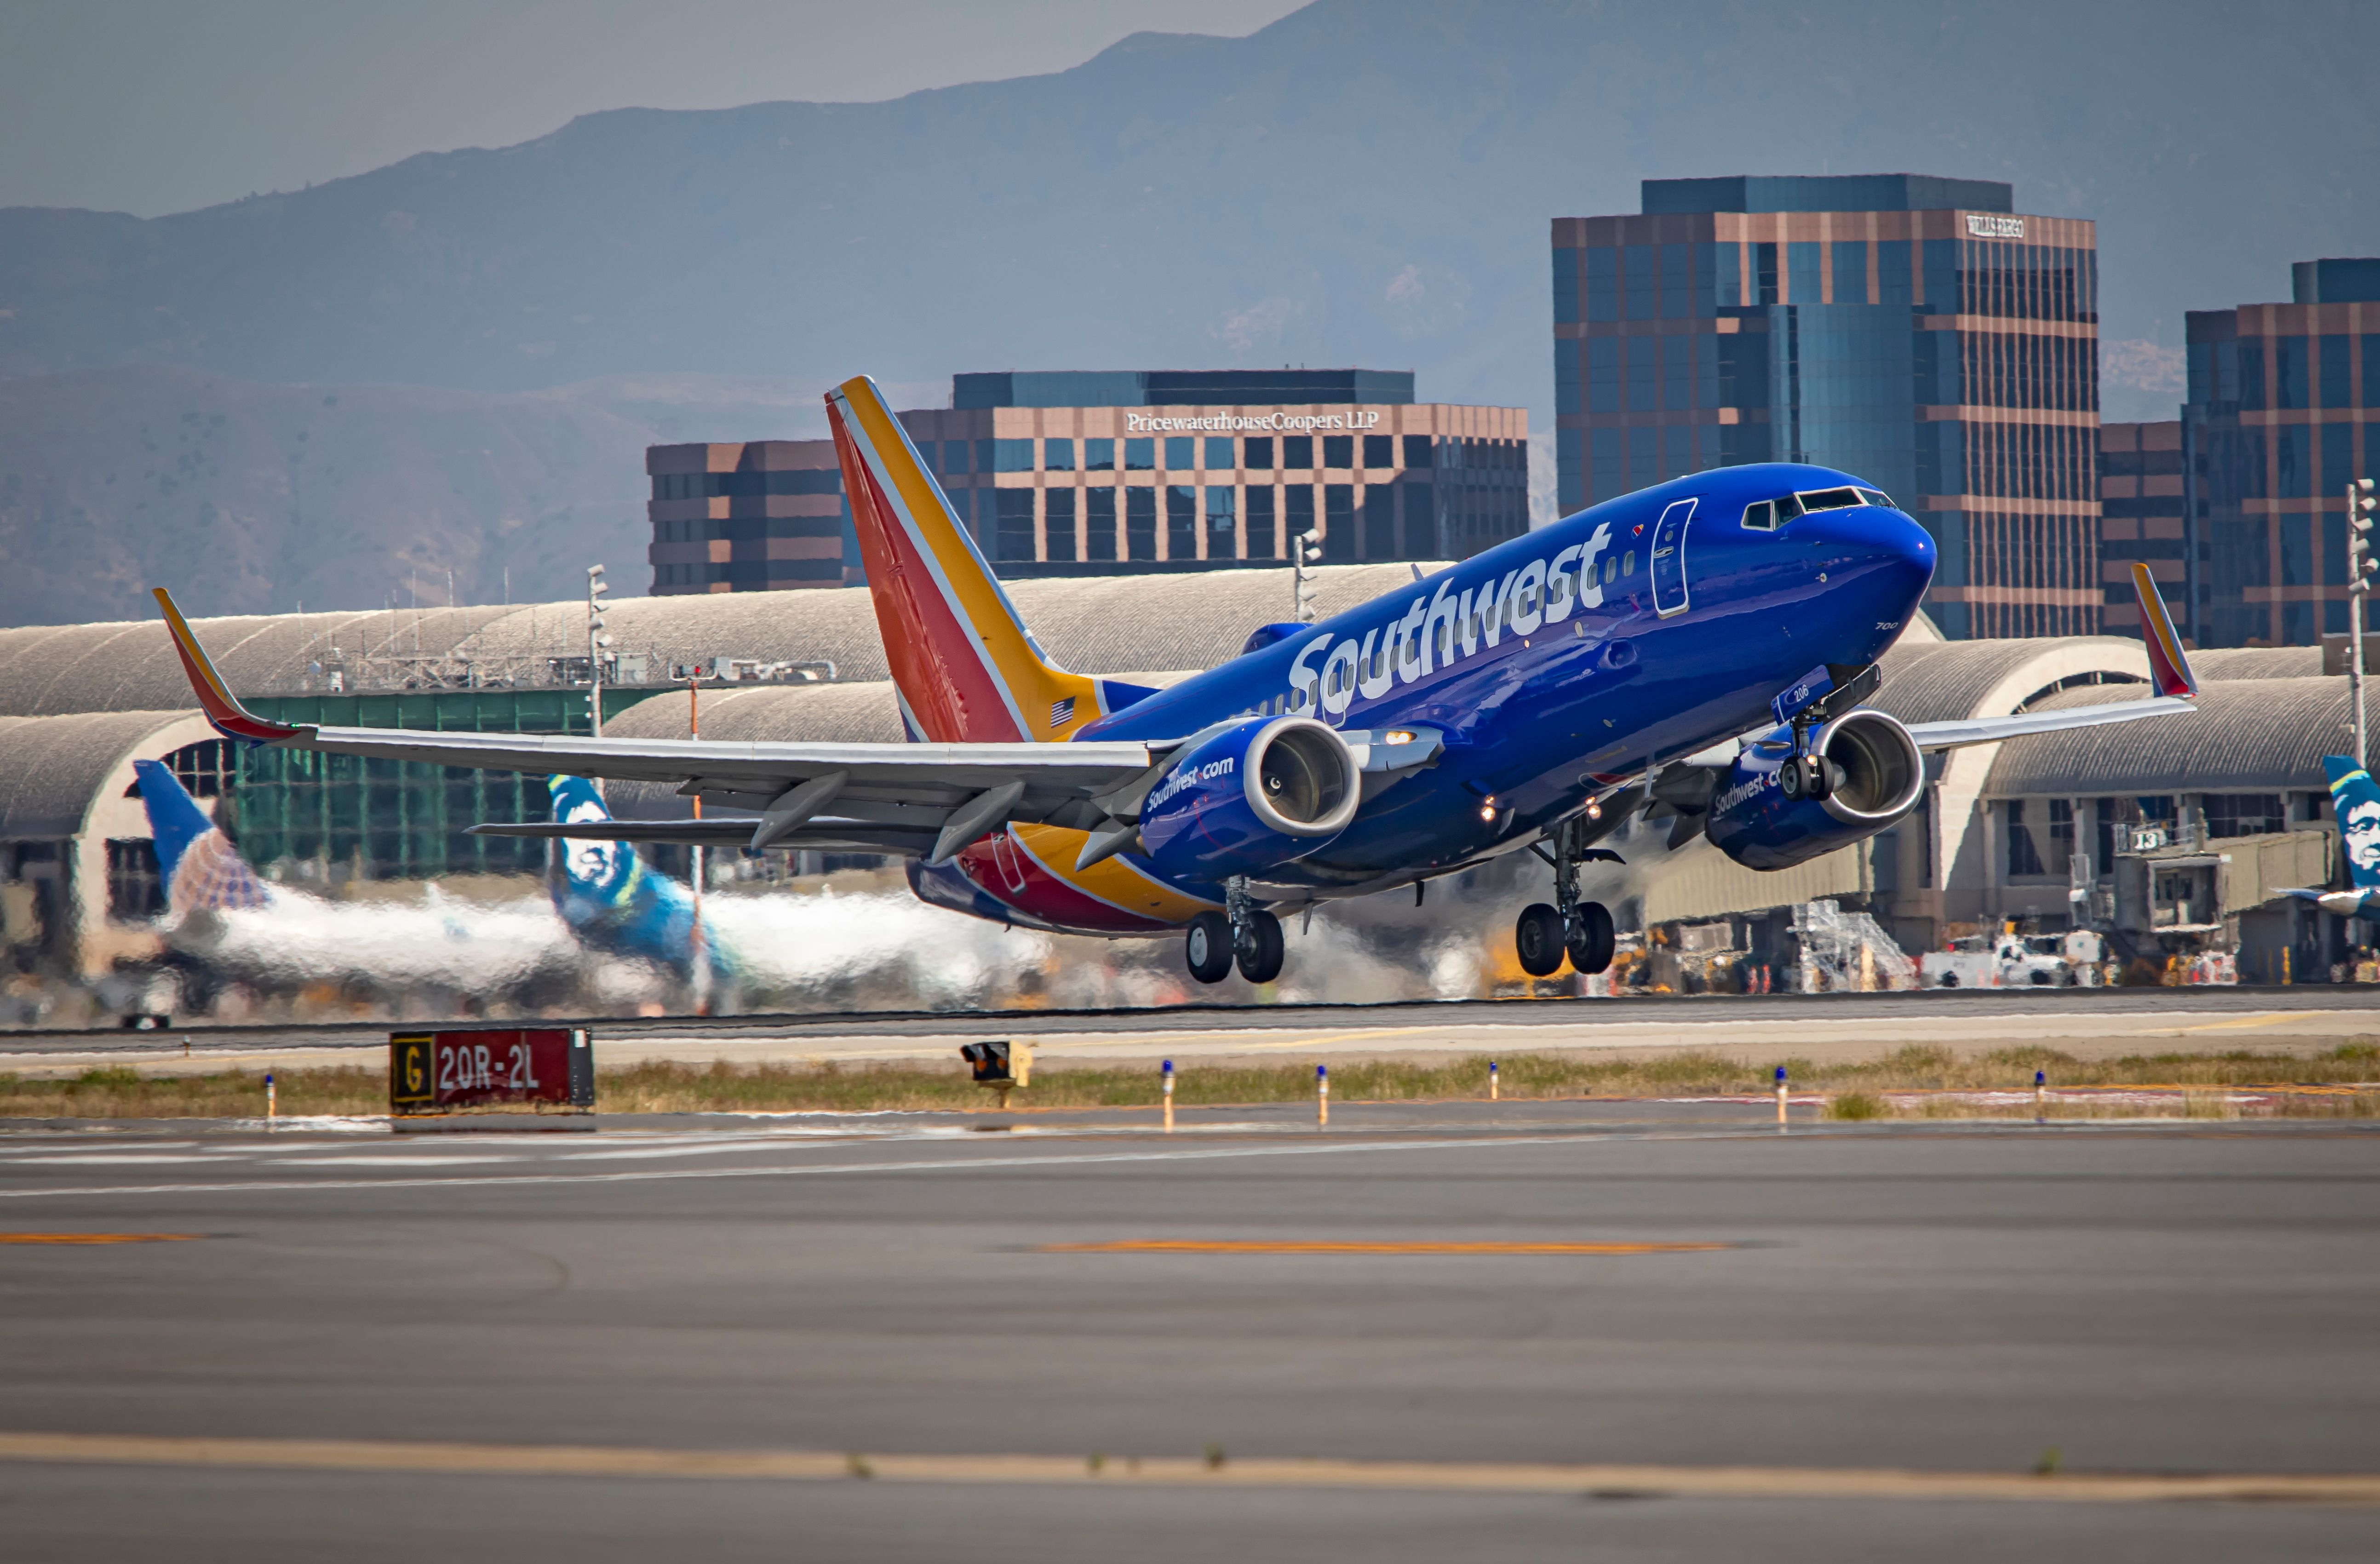 Shutterstock_1666141843 - SANTA ANA, CA/USA - 03/02/20: A Southwest Airlines airliner takes off at John Wayne Airport with planes and buildings in Irvine, California in the distance